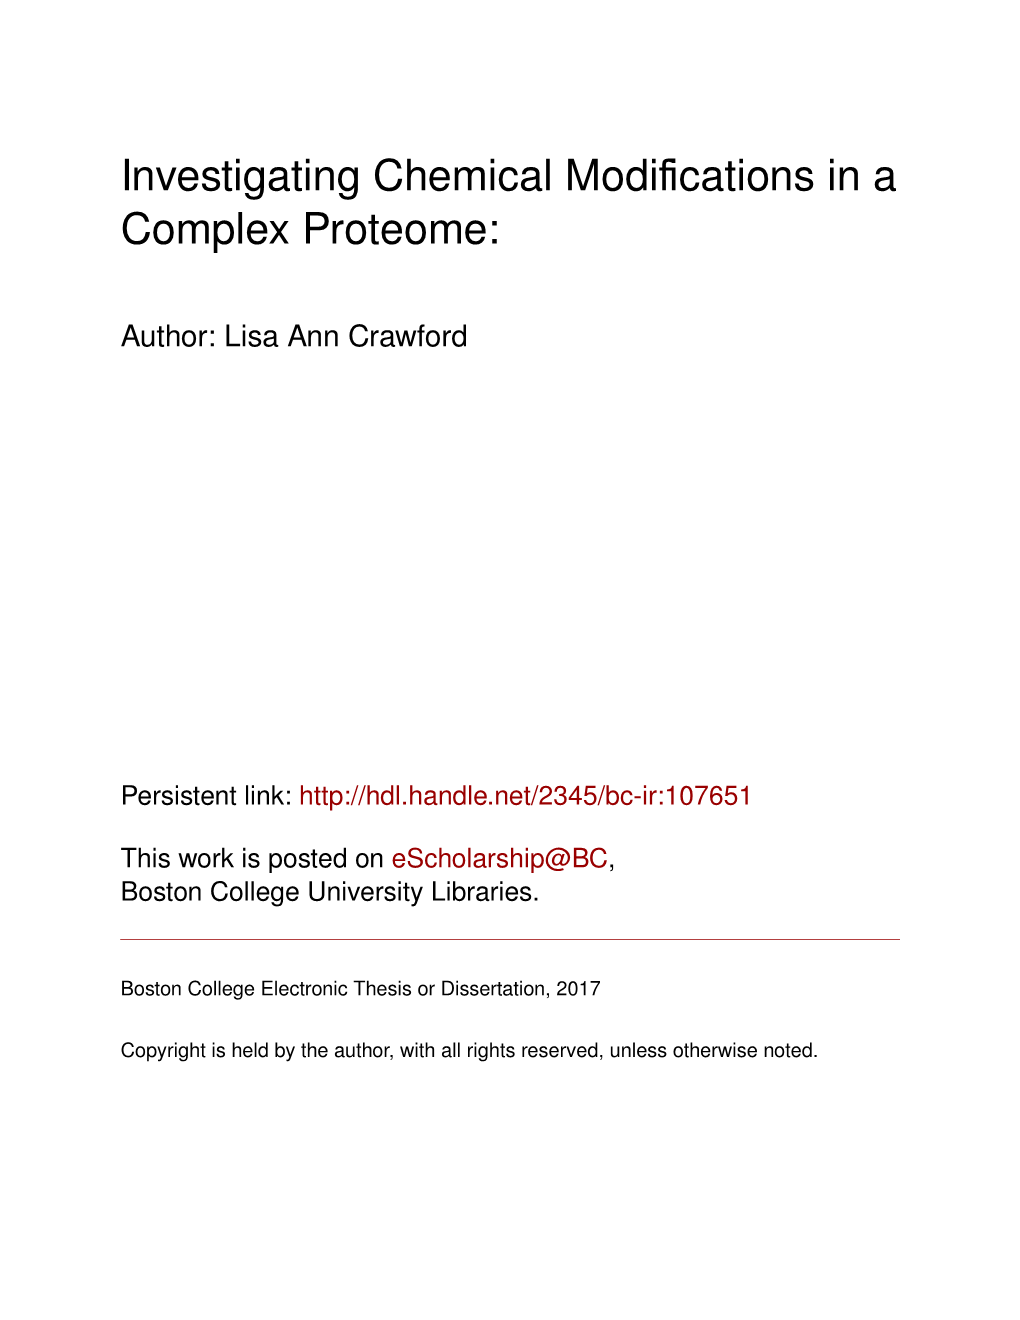 Investigating Chemical Modifications in a Complex Proteome